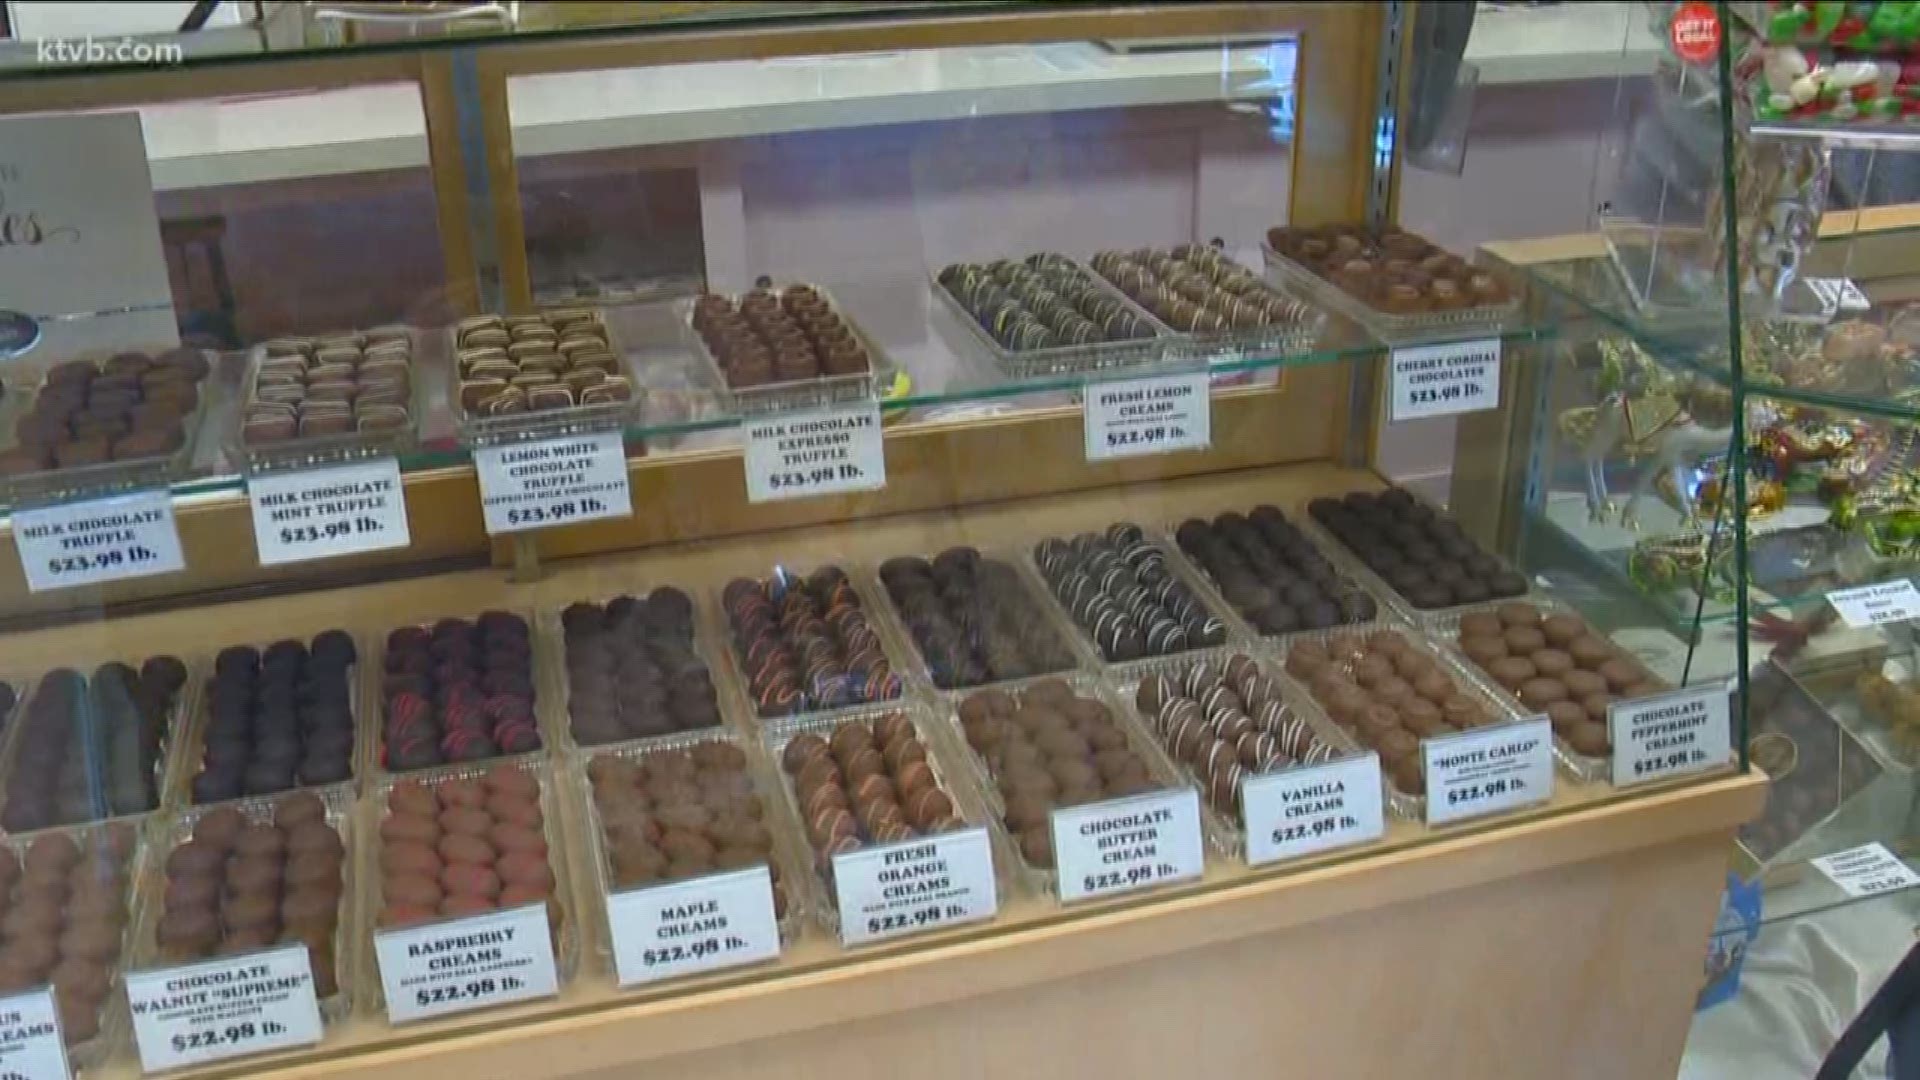 The Boise candy shop has been in business for 73 years.